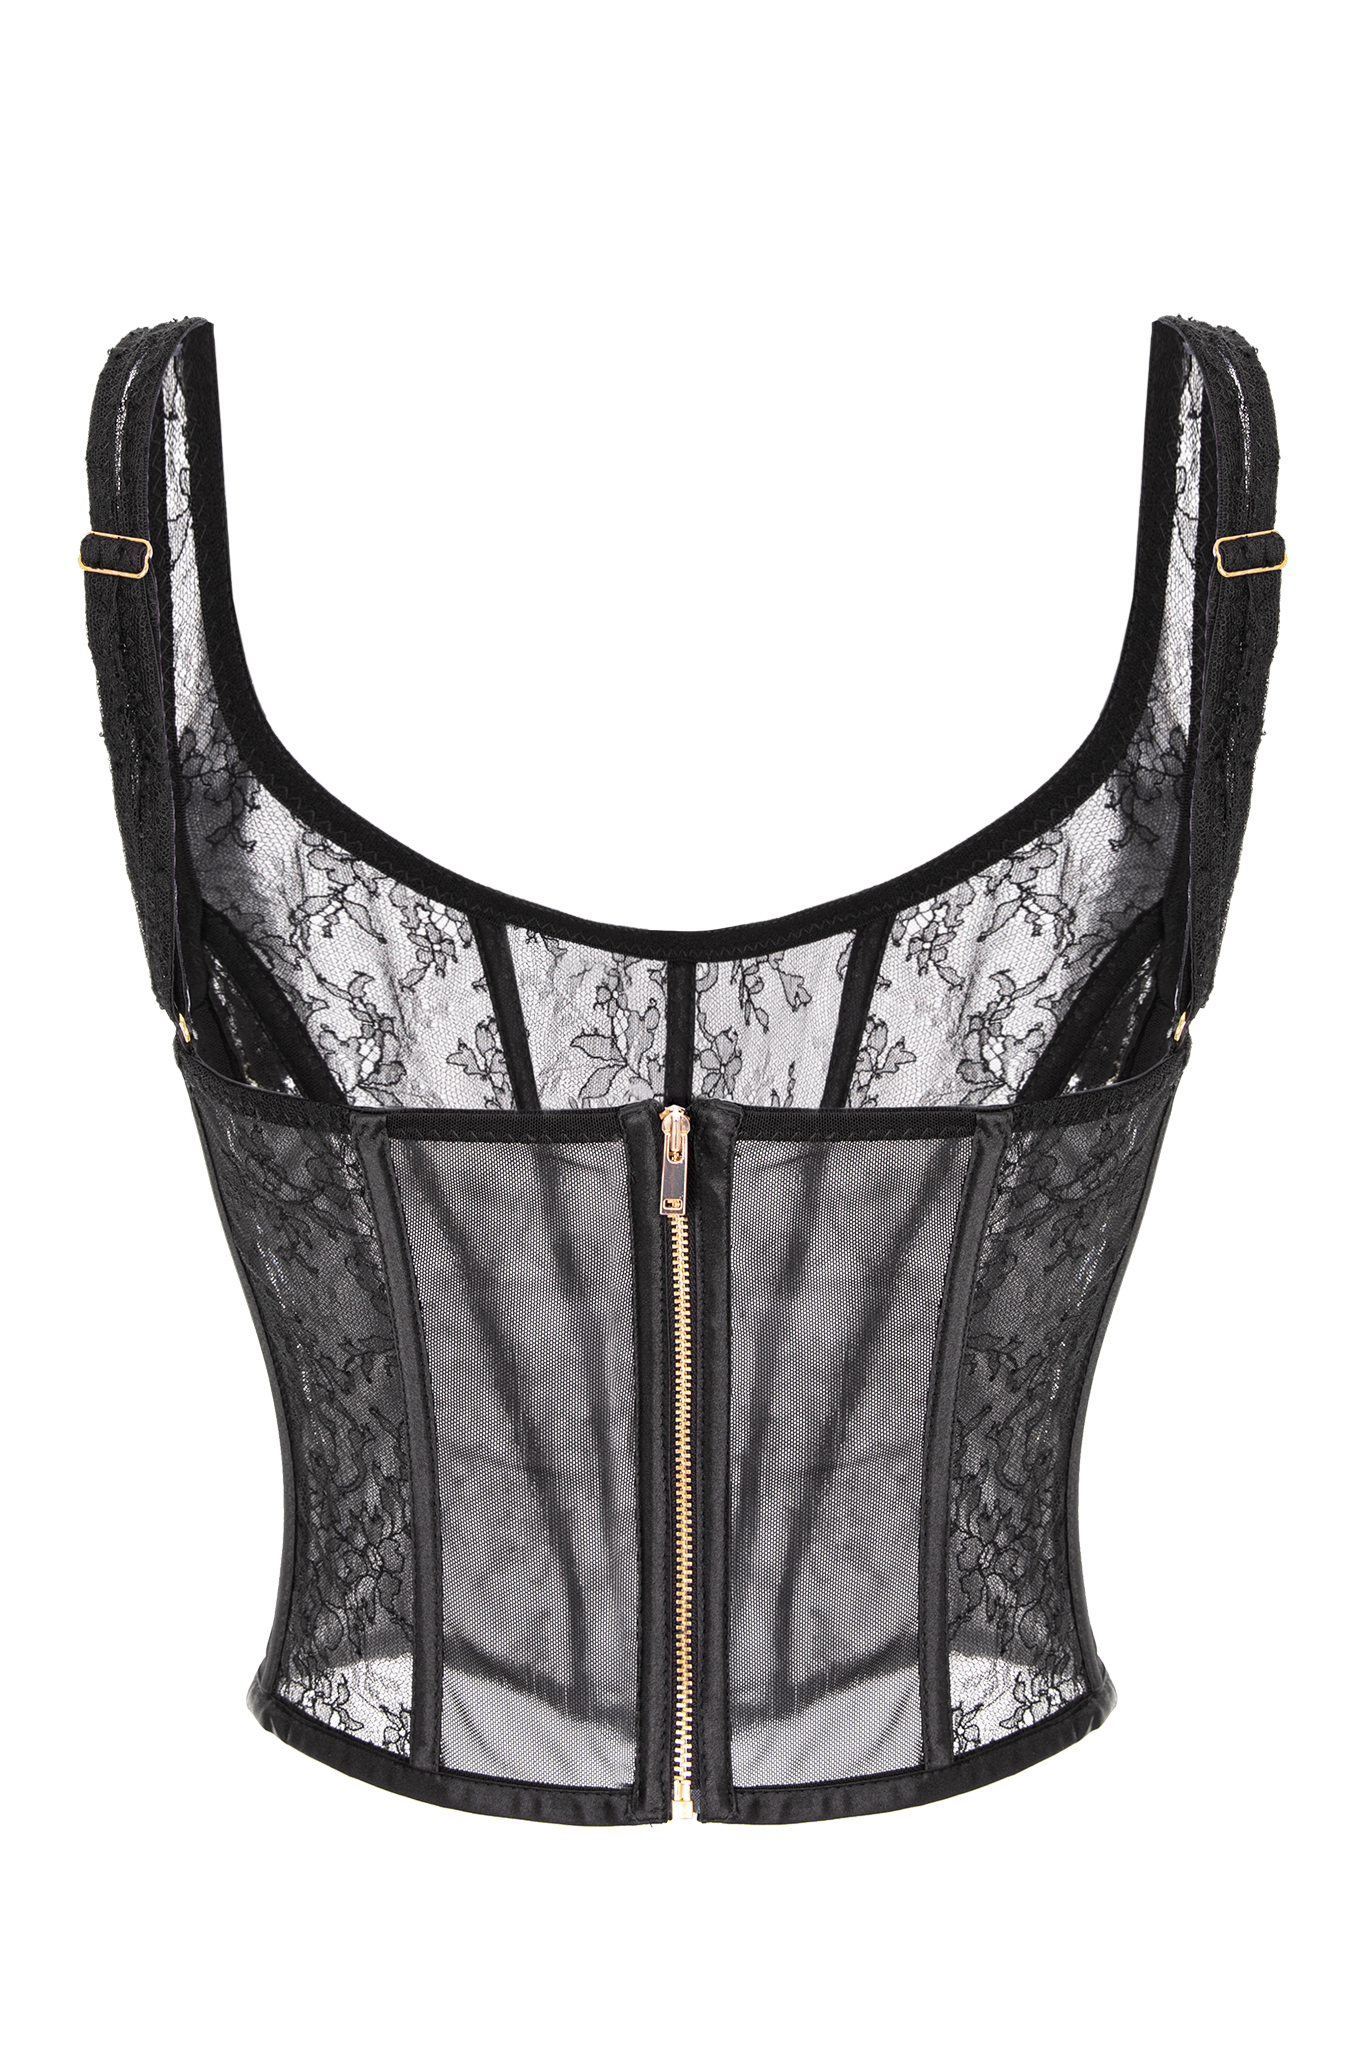 Victoria Black Chantilly Lace Special Occasion Bustier